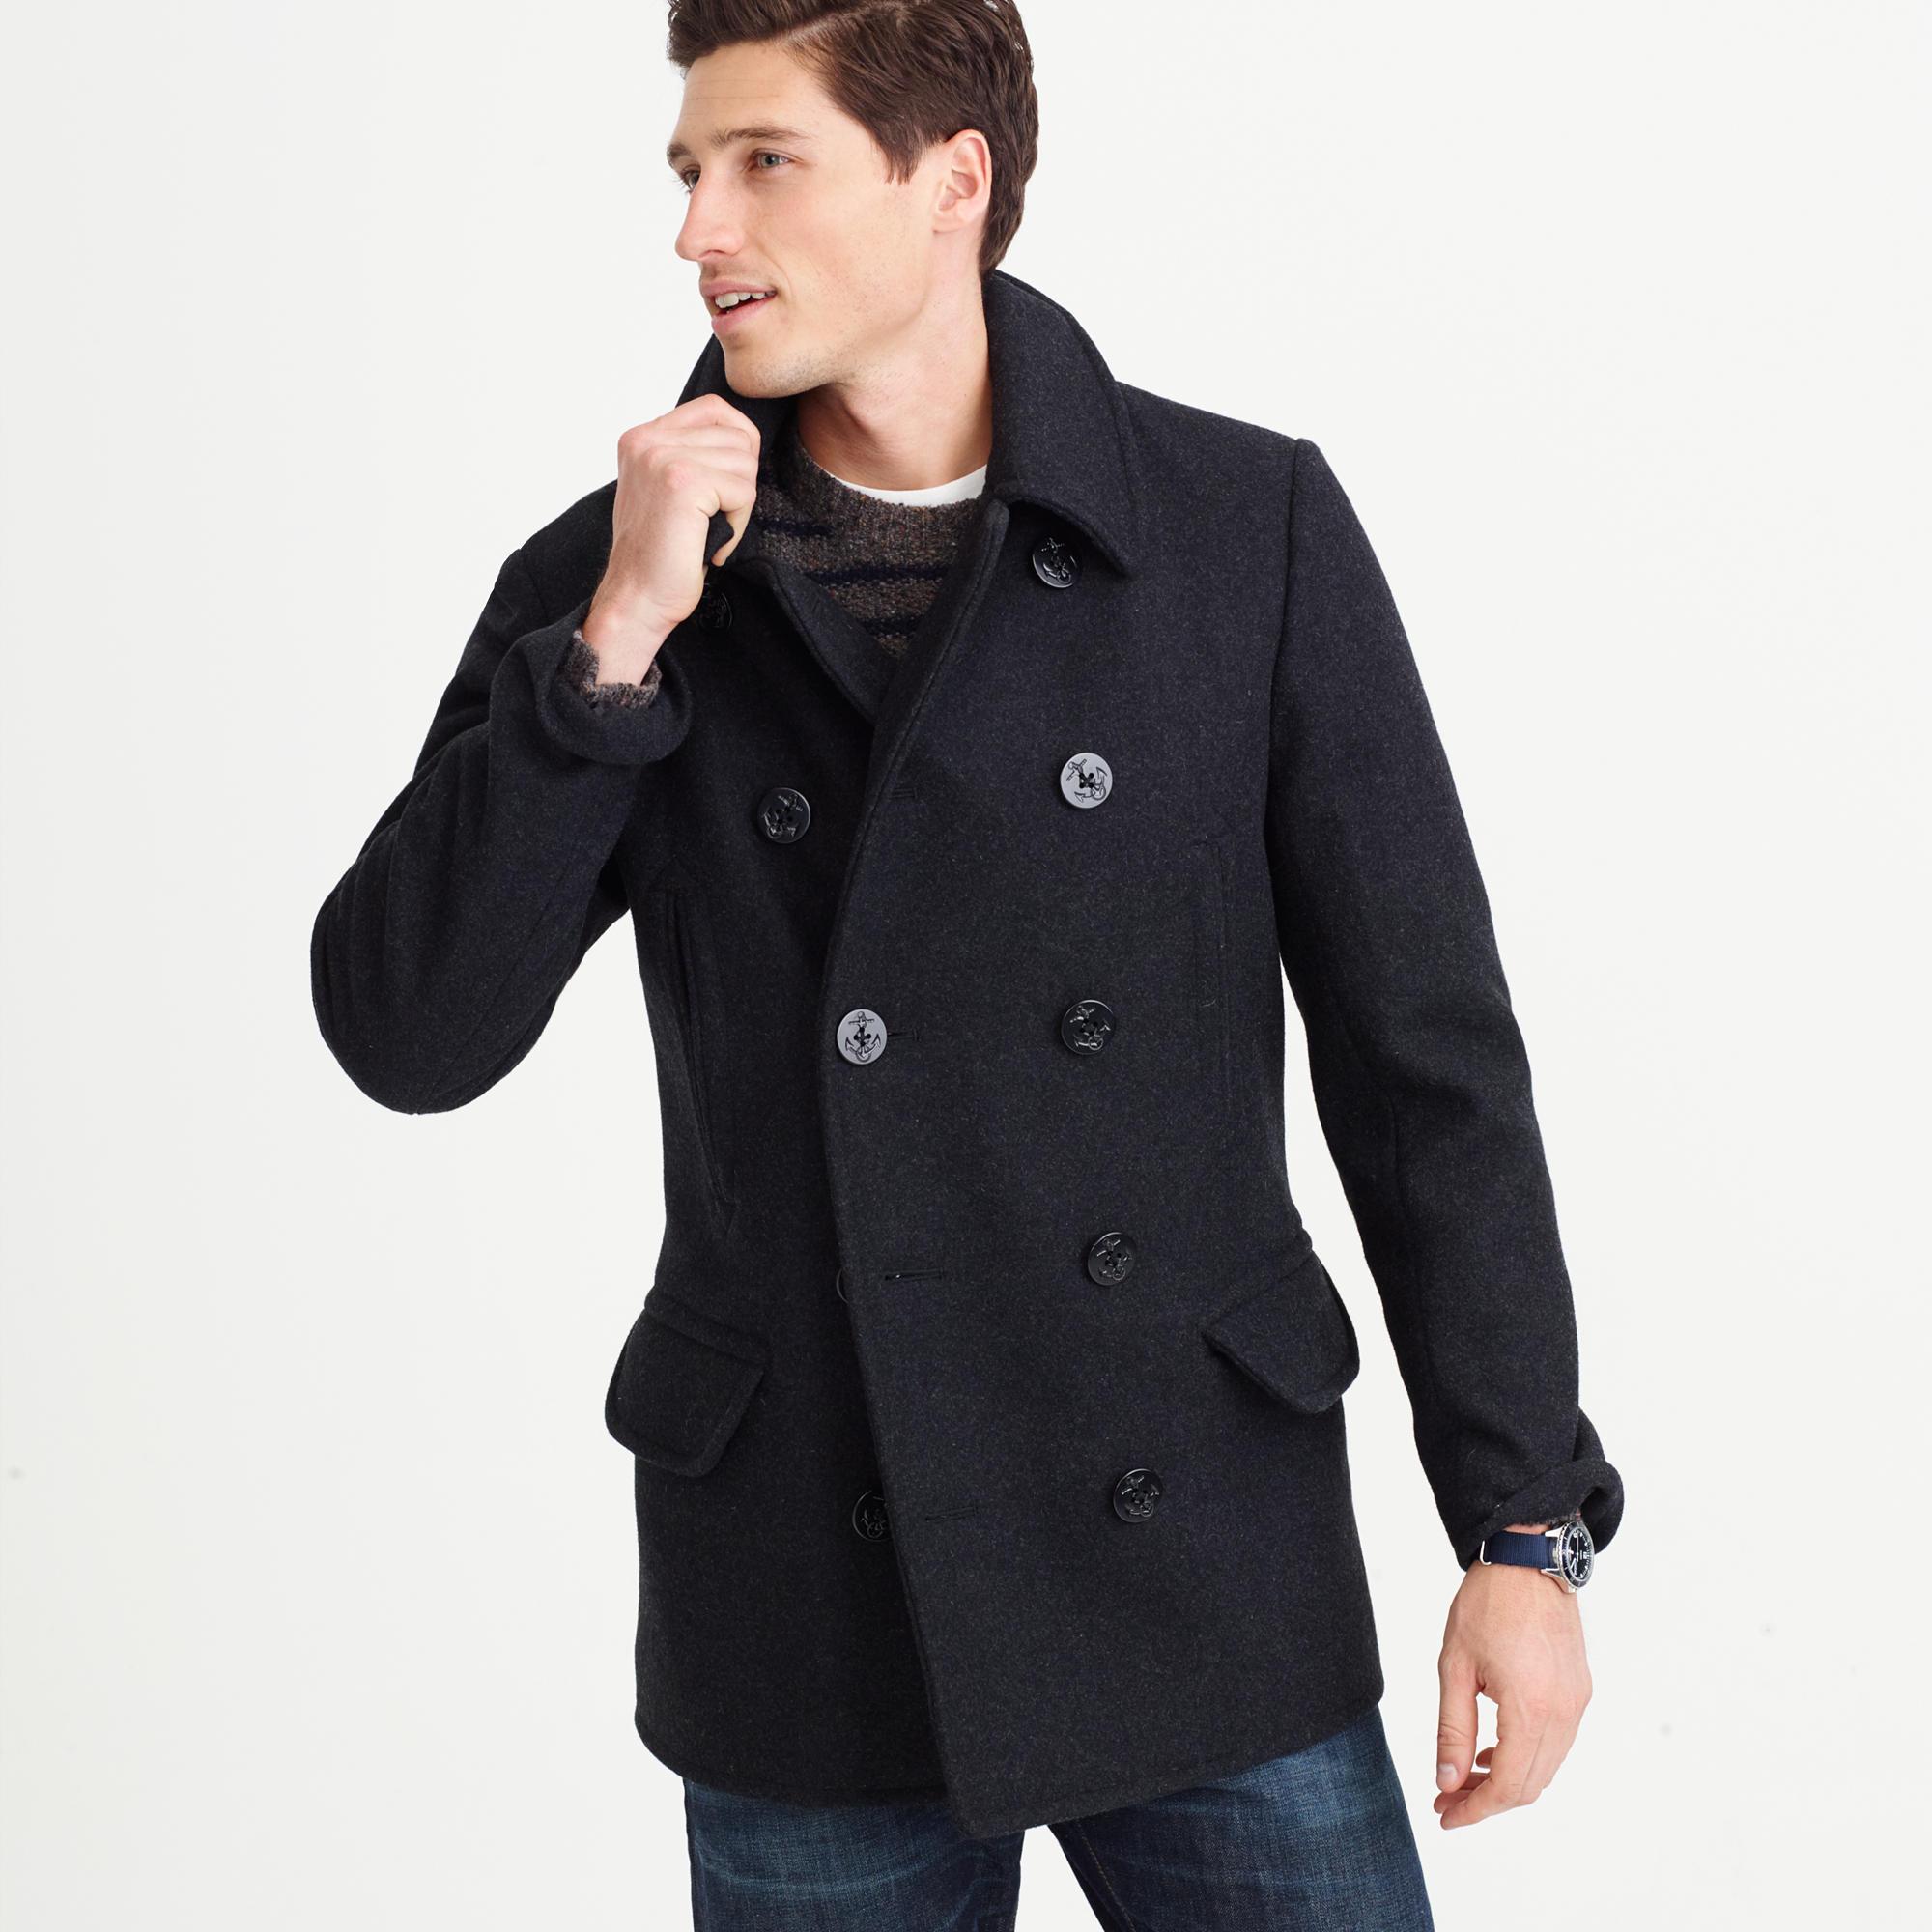 J.Crew Wool Dock Peacoat With Thinsulate in Charcoal (Gray) for Men - Lyst